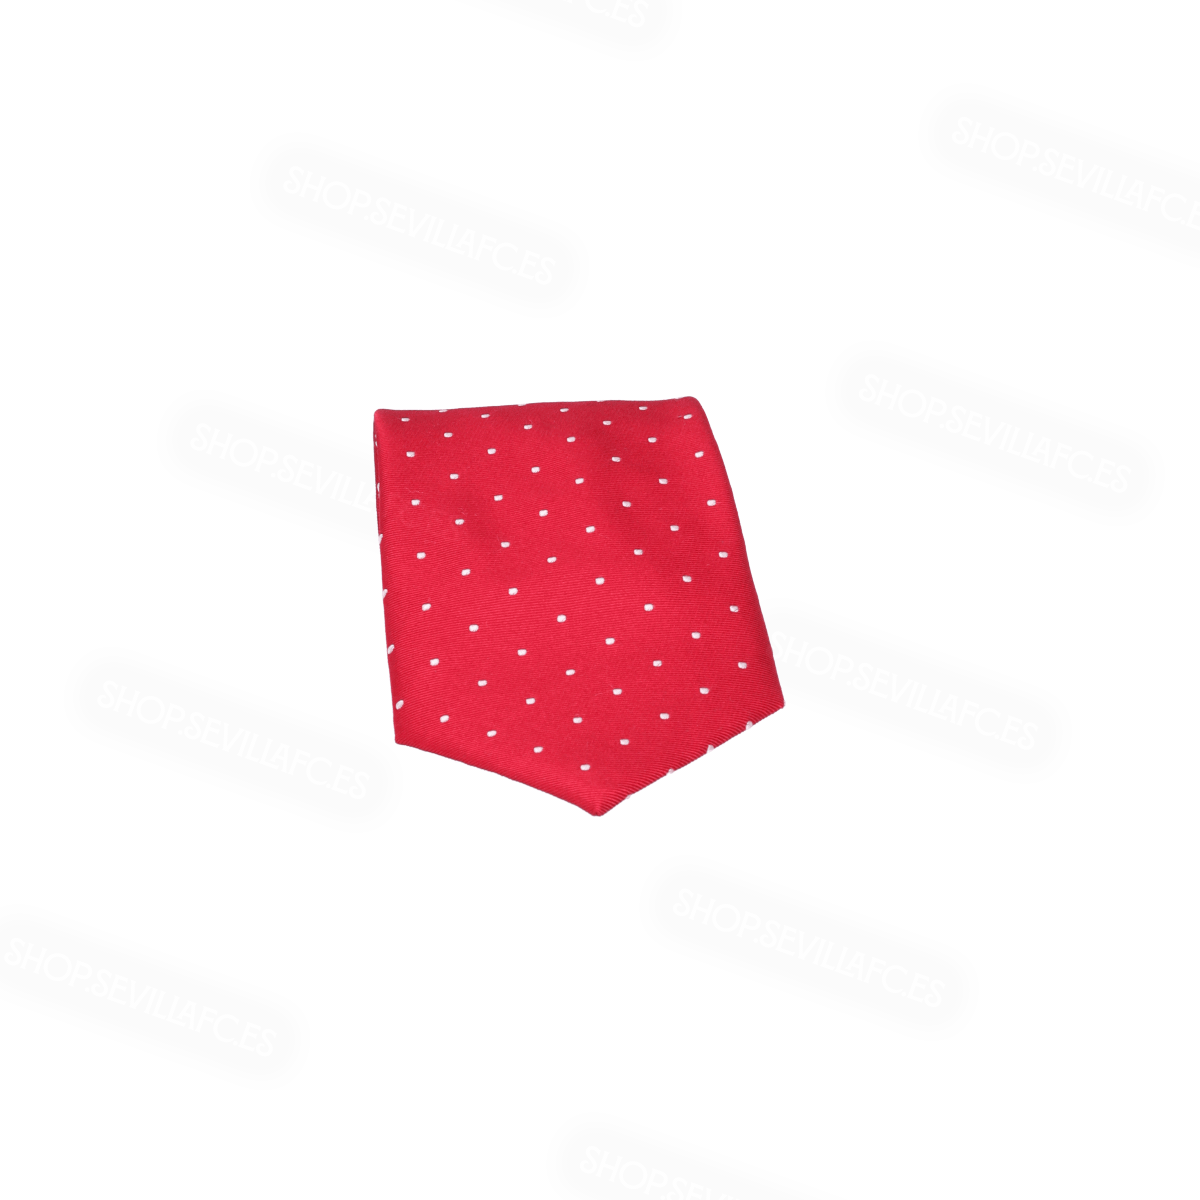 Red tie with white polka dots